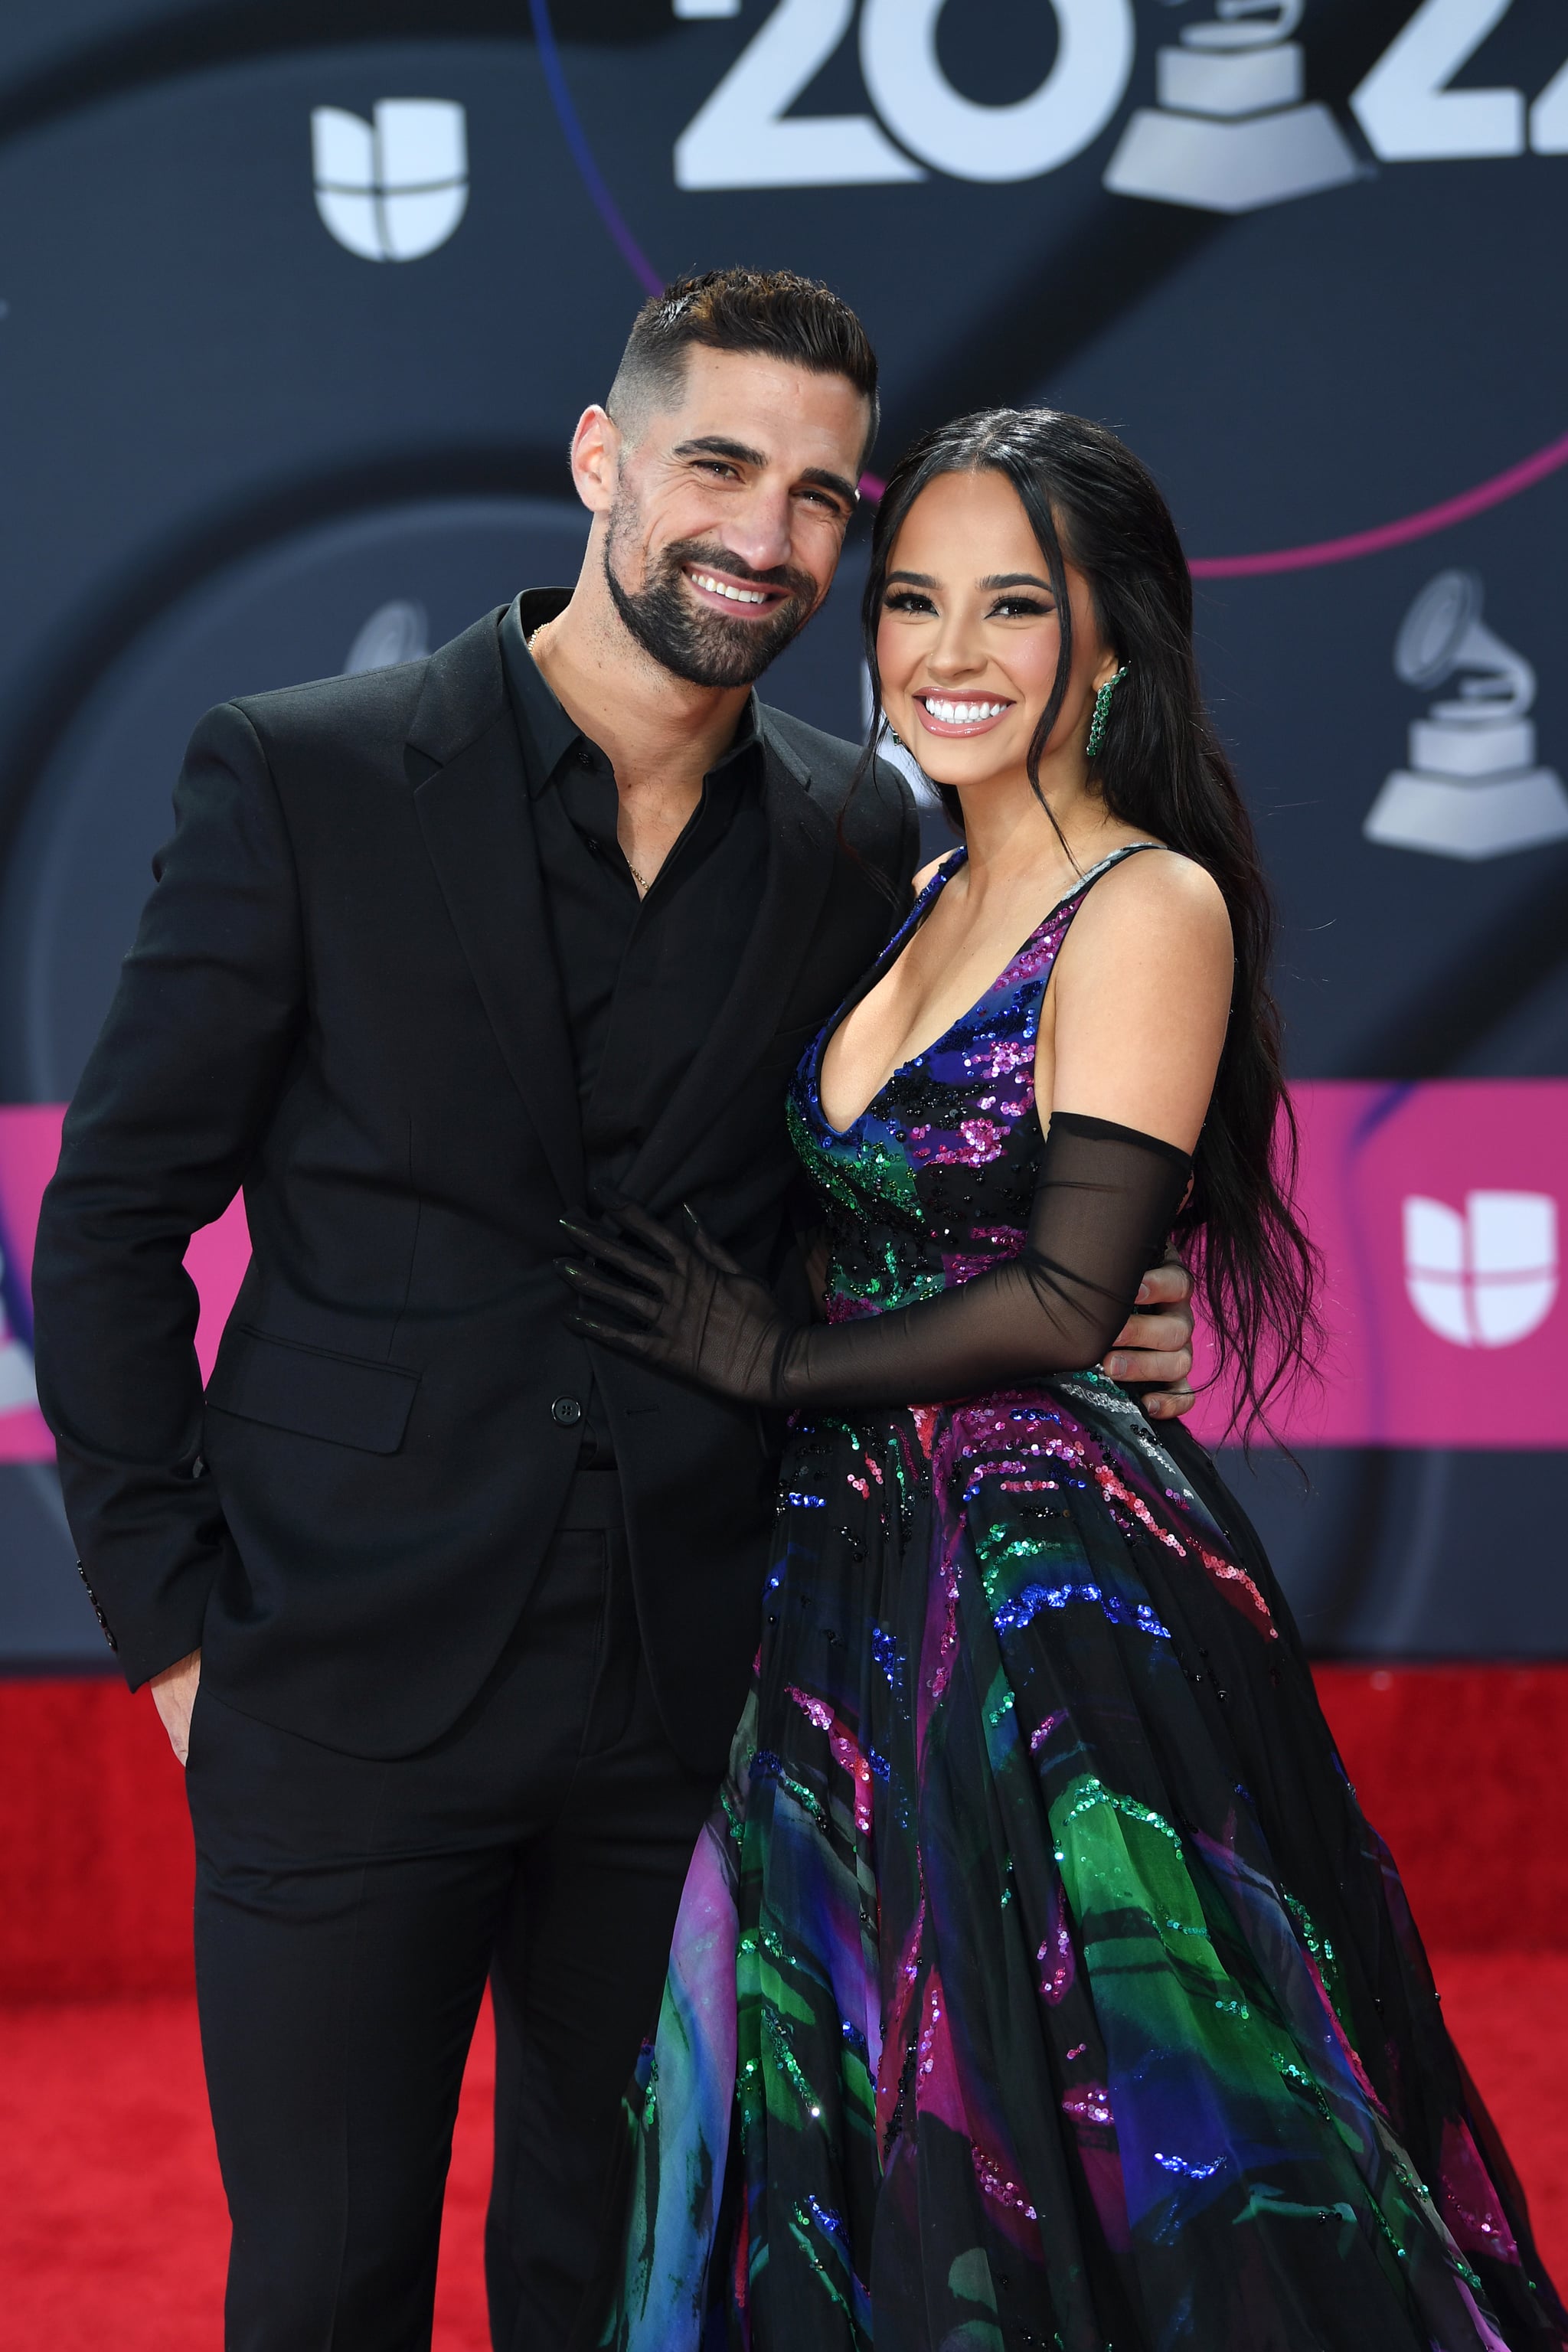 LAS VEGAS, NEVADA - NOVEMBER 17: (LR) Sebastian Lletget and Becky G attend the 23rd Annual Latin Grammy Awards at Michelob ULTRA Arena on November 17, 2022 in Las Vegas, Nevada.  (Photo by Denise Truscello/Getty Images for The Latin Recording Academy)